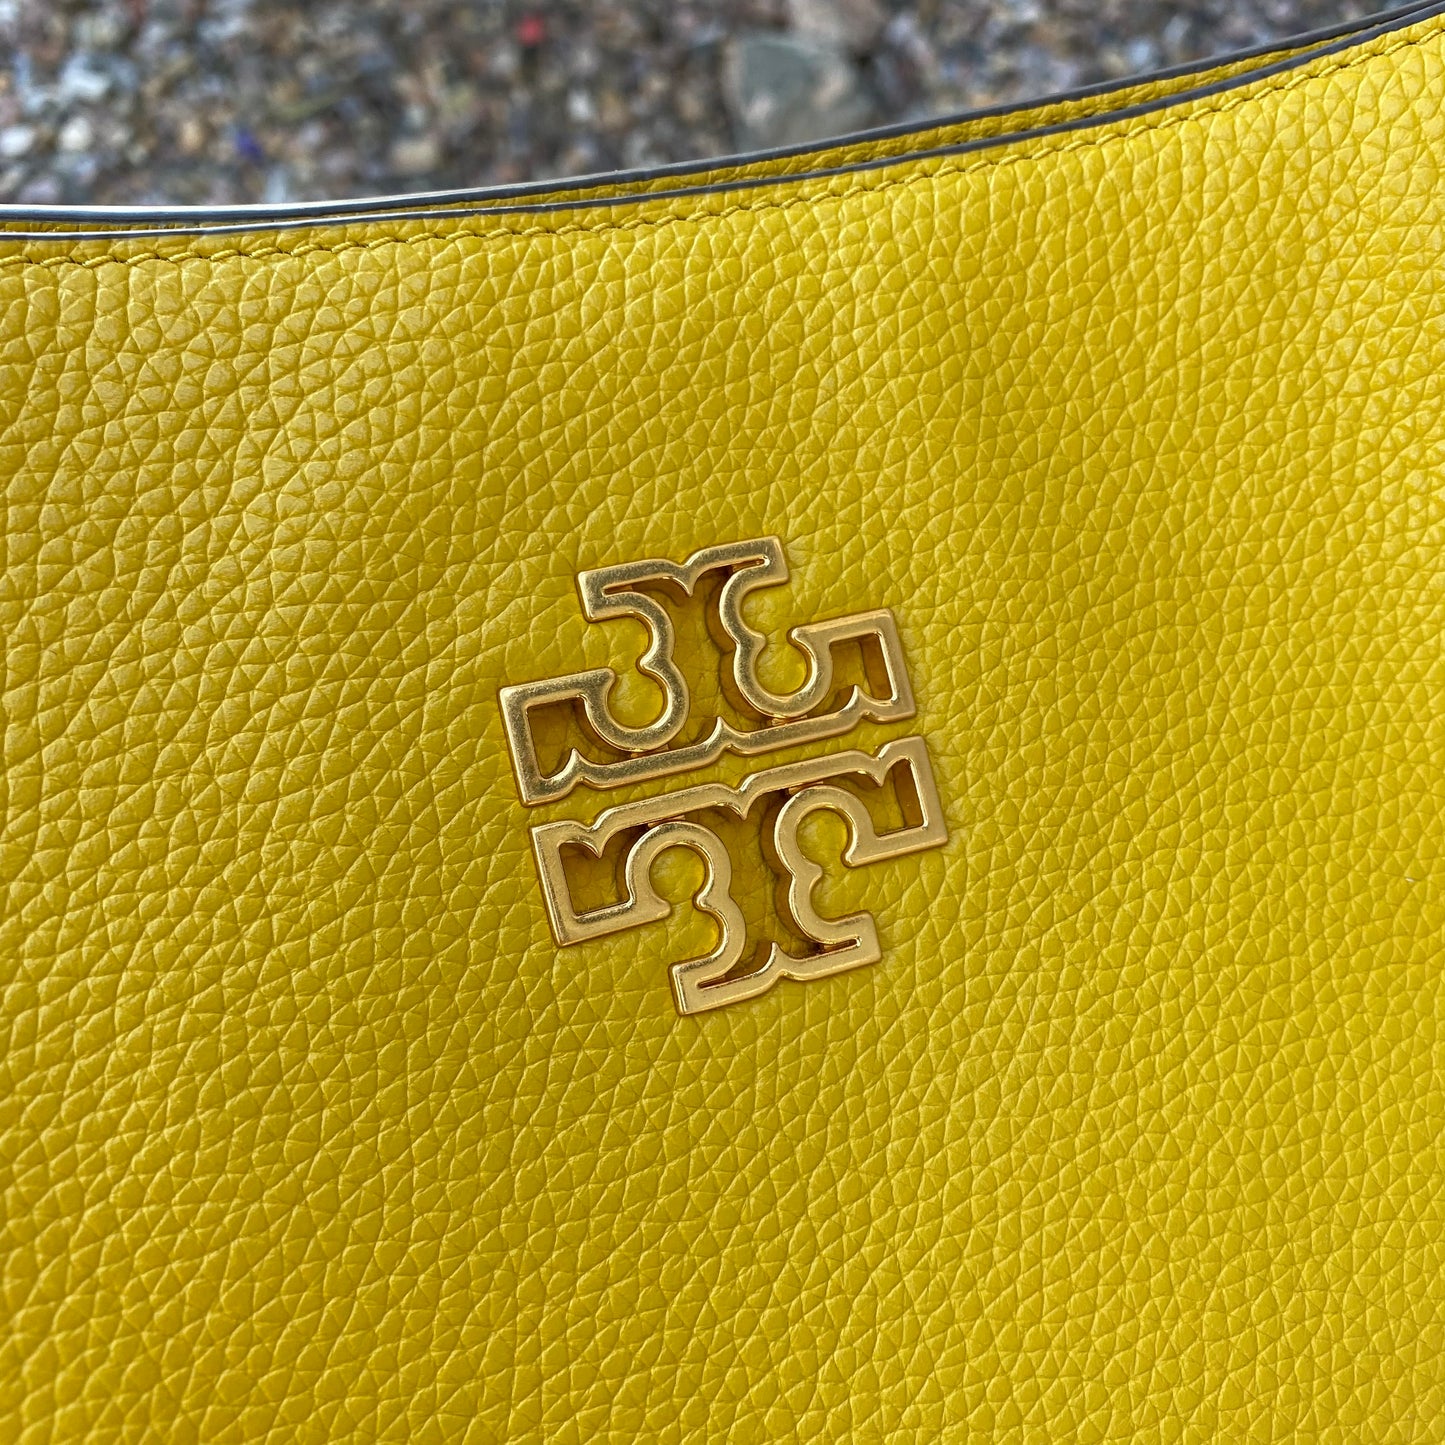 Tory Burch Britten Slouchy Chain Pebbled Leather Tote